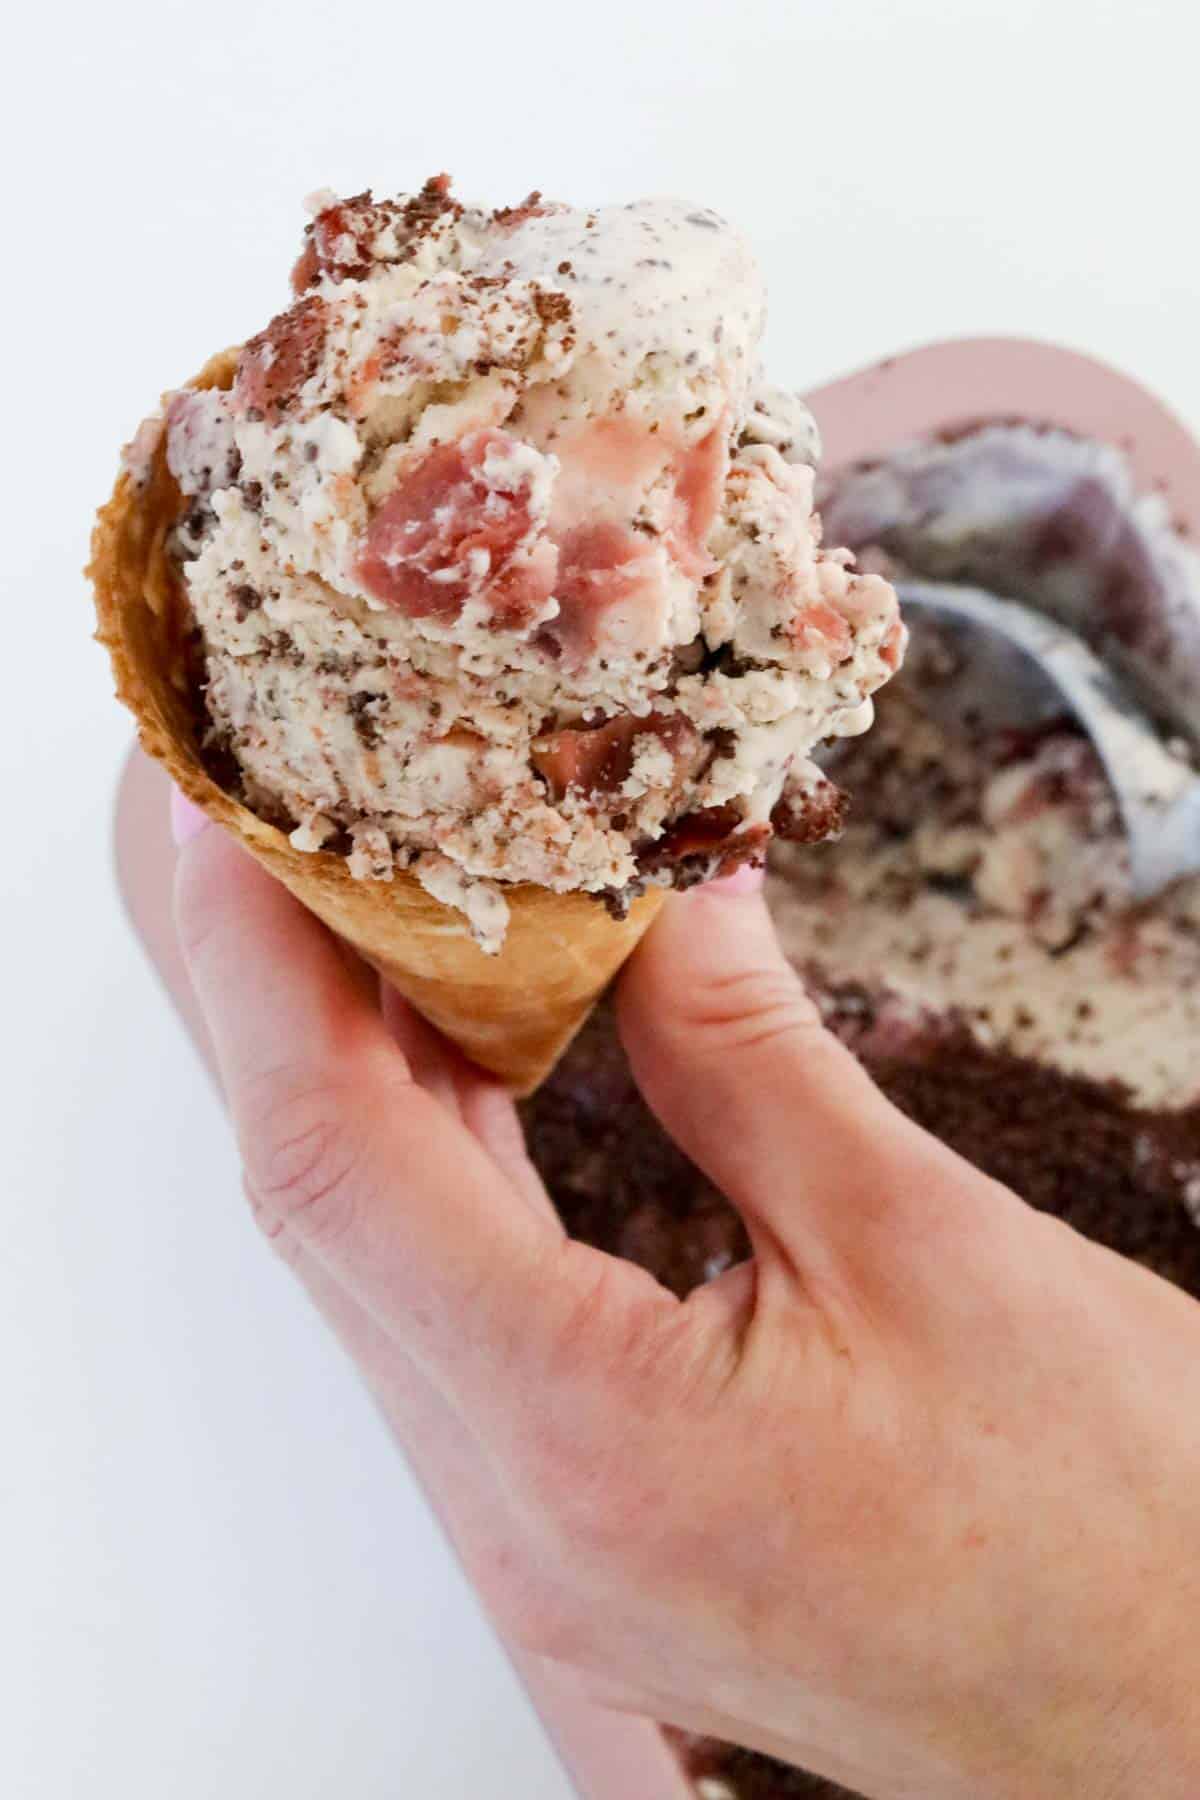 A hand holding a waffle cone filled with Black Forest ice cream.